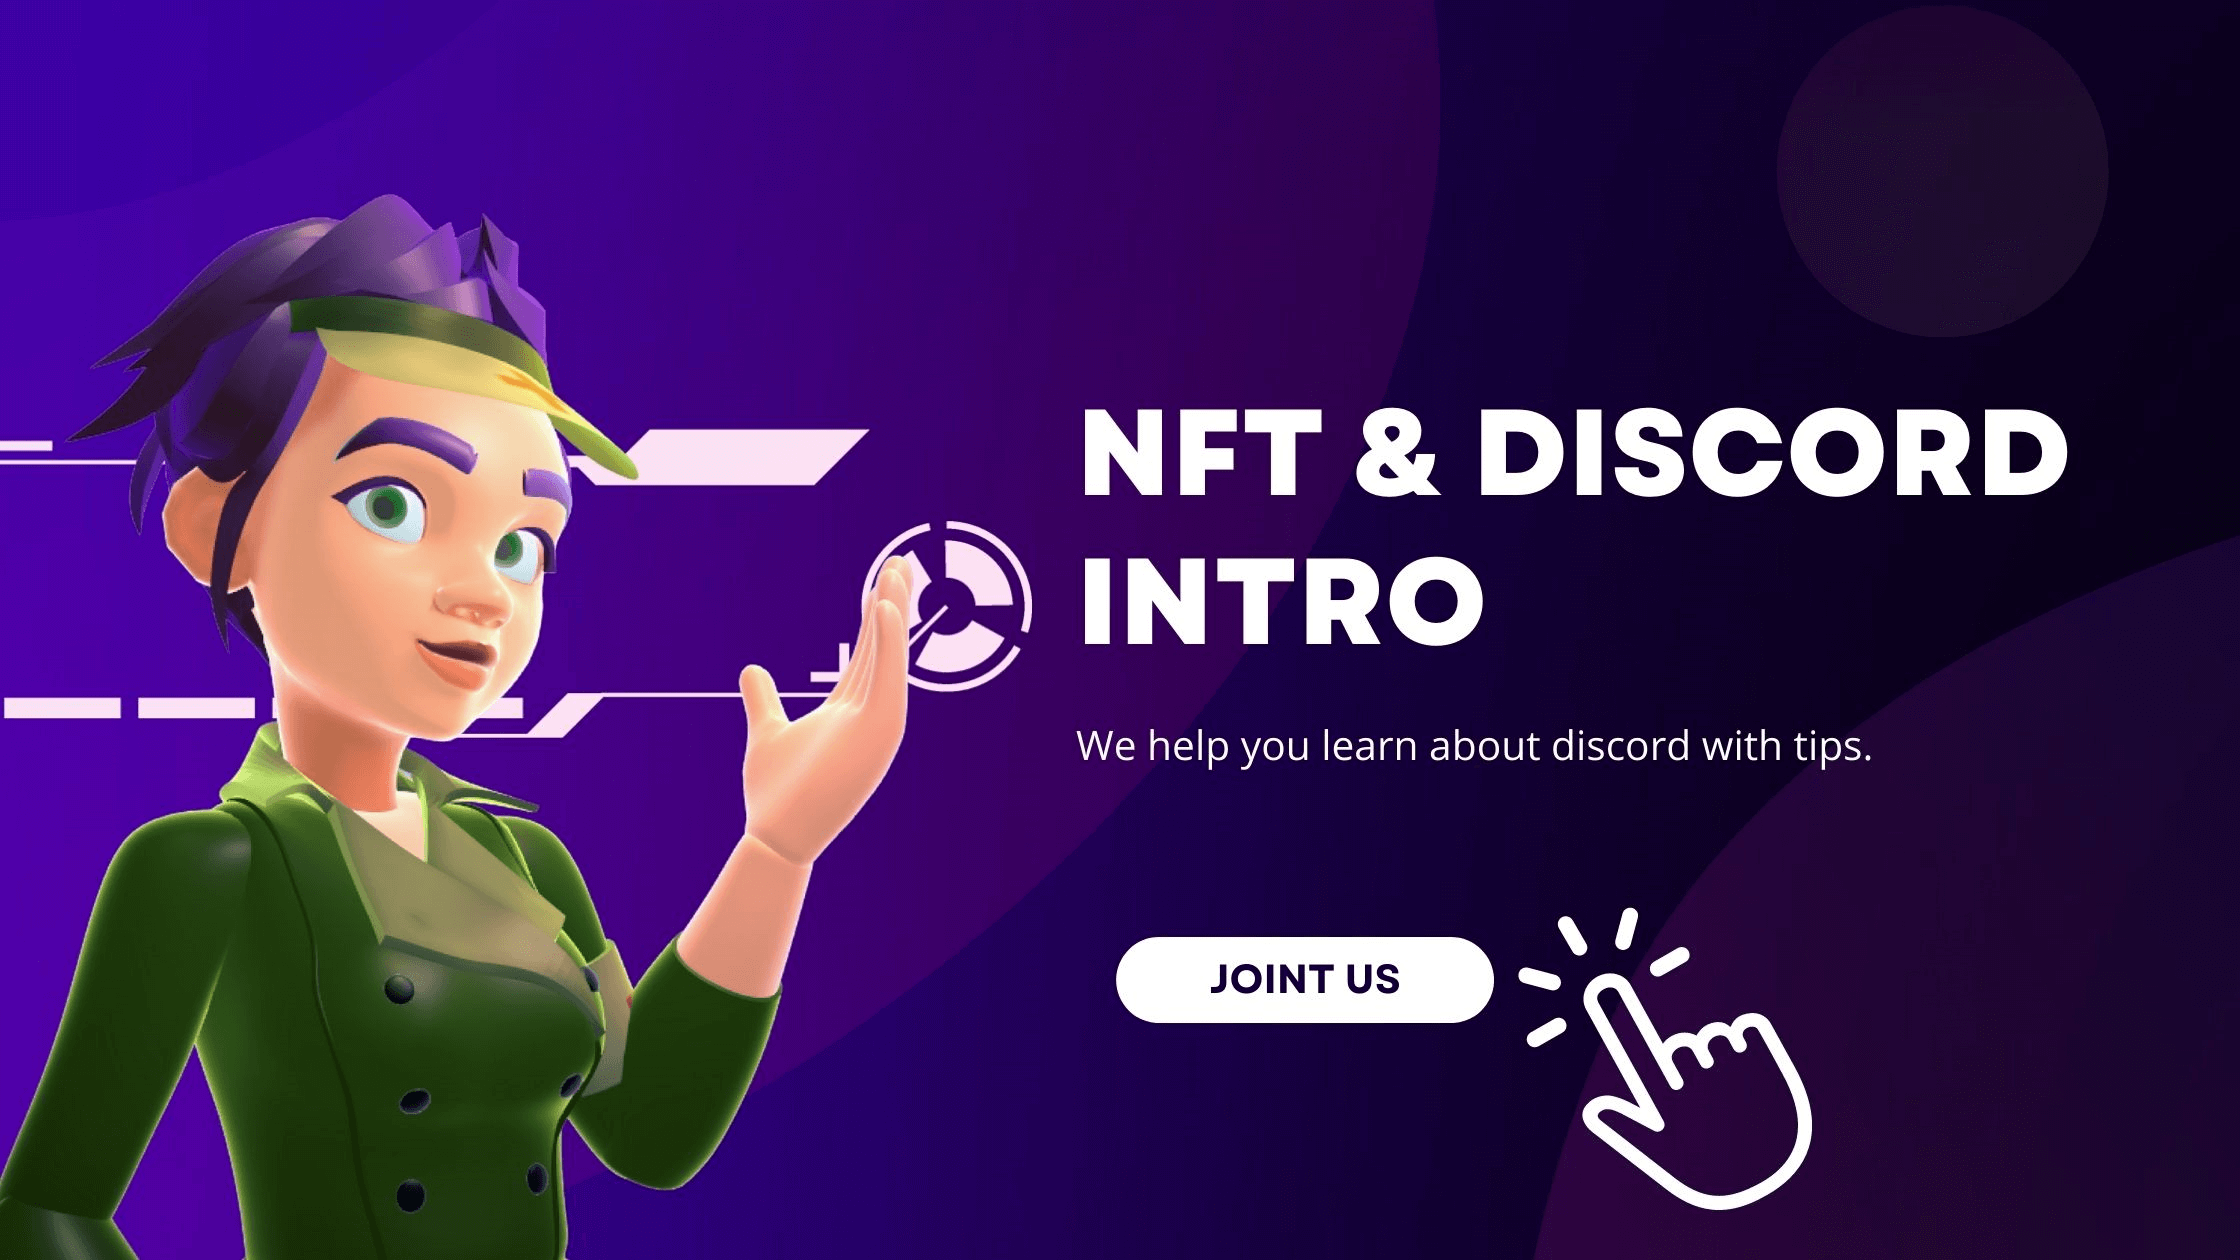 Introduction to NFT Online Communities